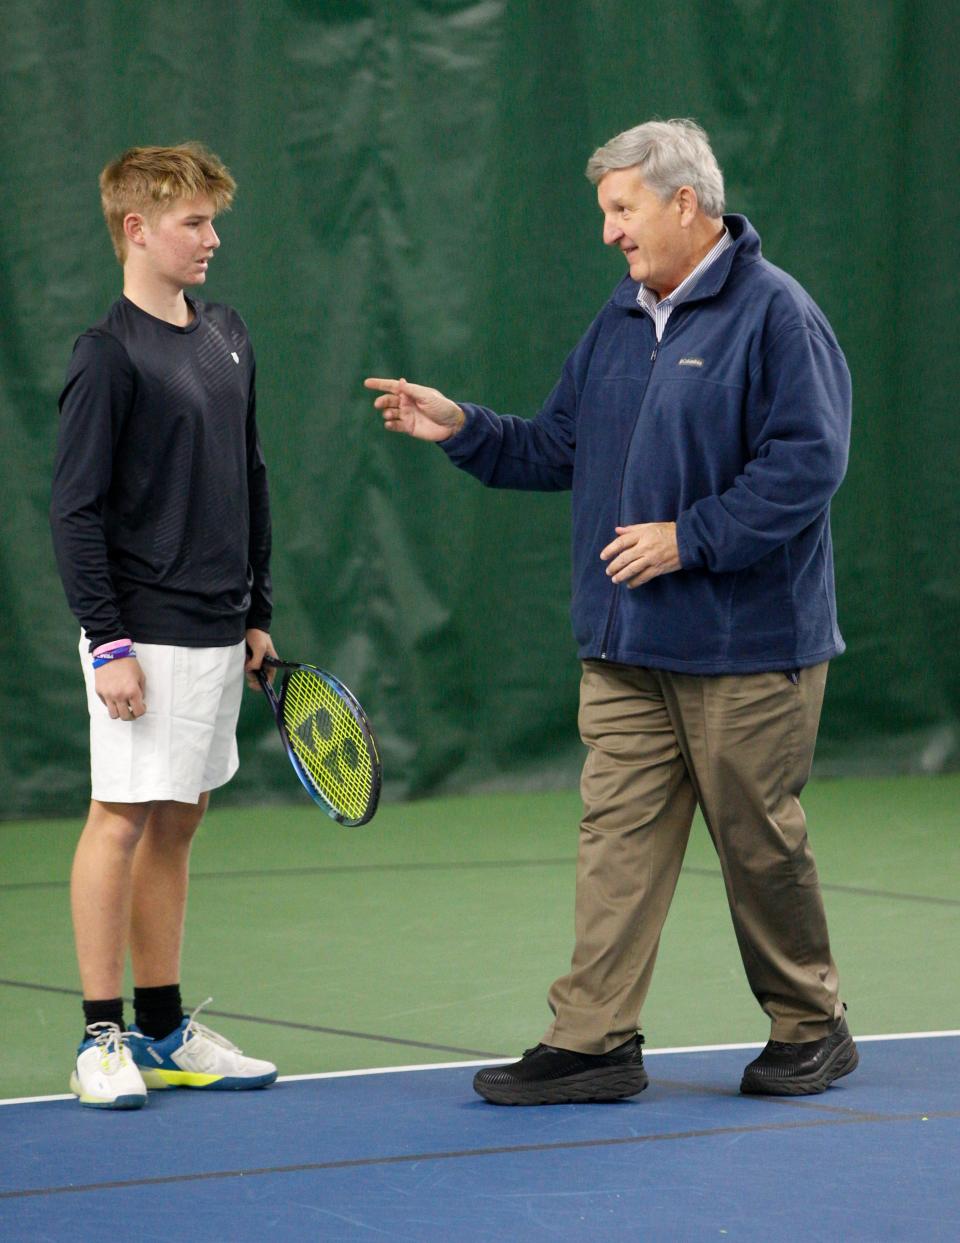 David Filer speaks with his friend, Dan Bigg, at right, at a practice session Monday, Jan. 16, 2023, at the South Bend Racquet Club.